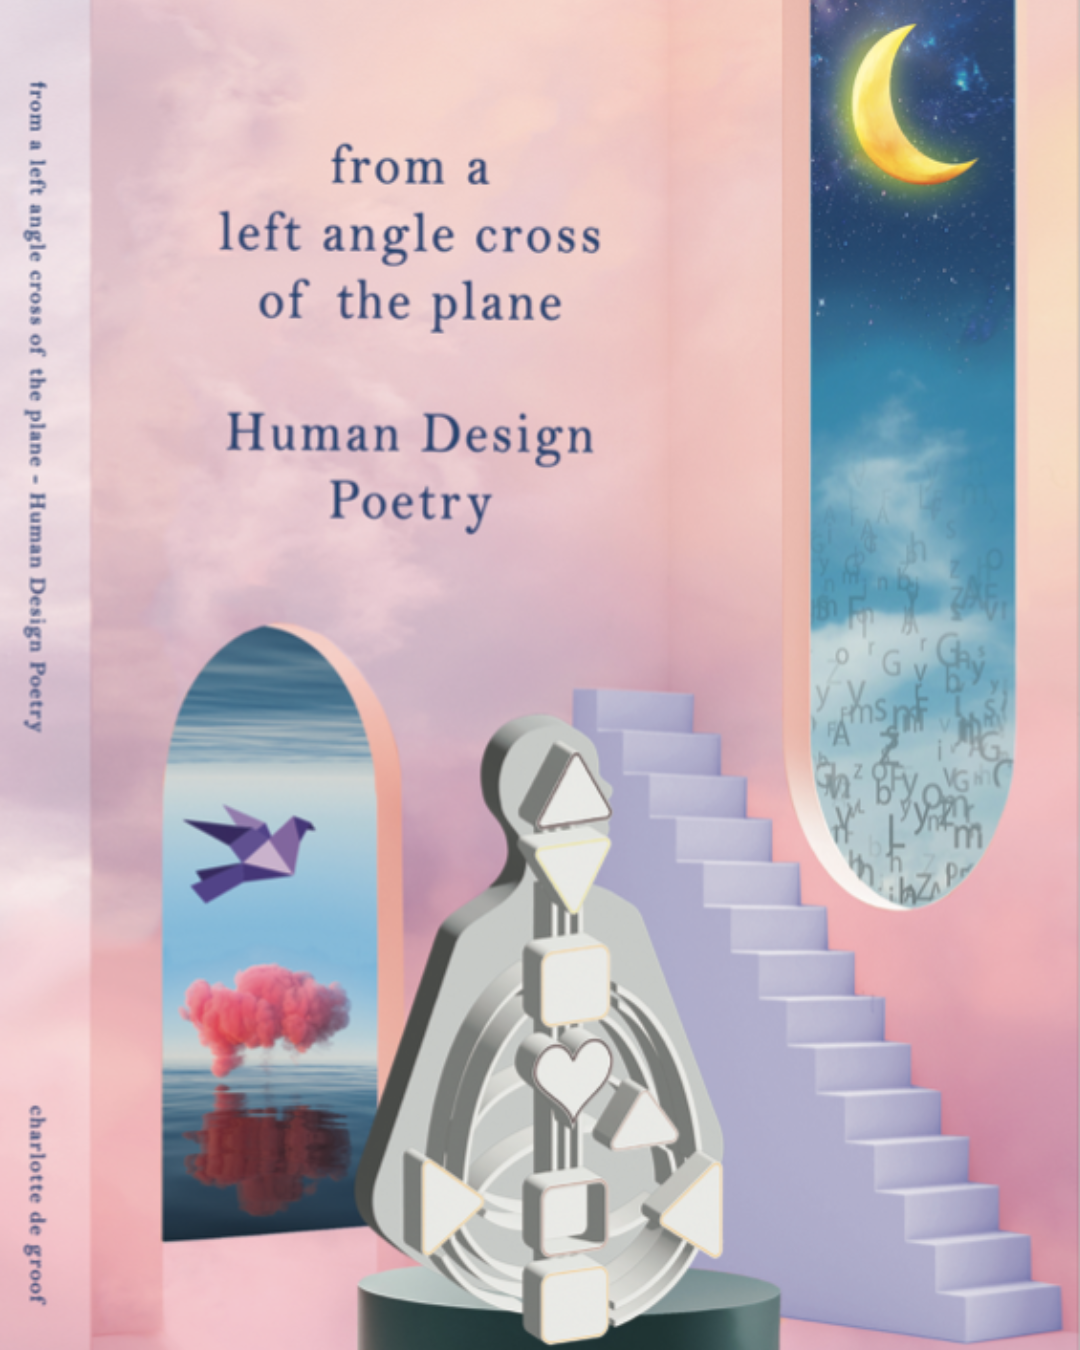 From a left angle cross of the plane - Human Design Poetry